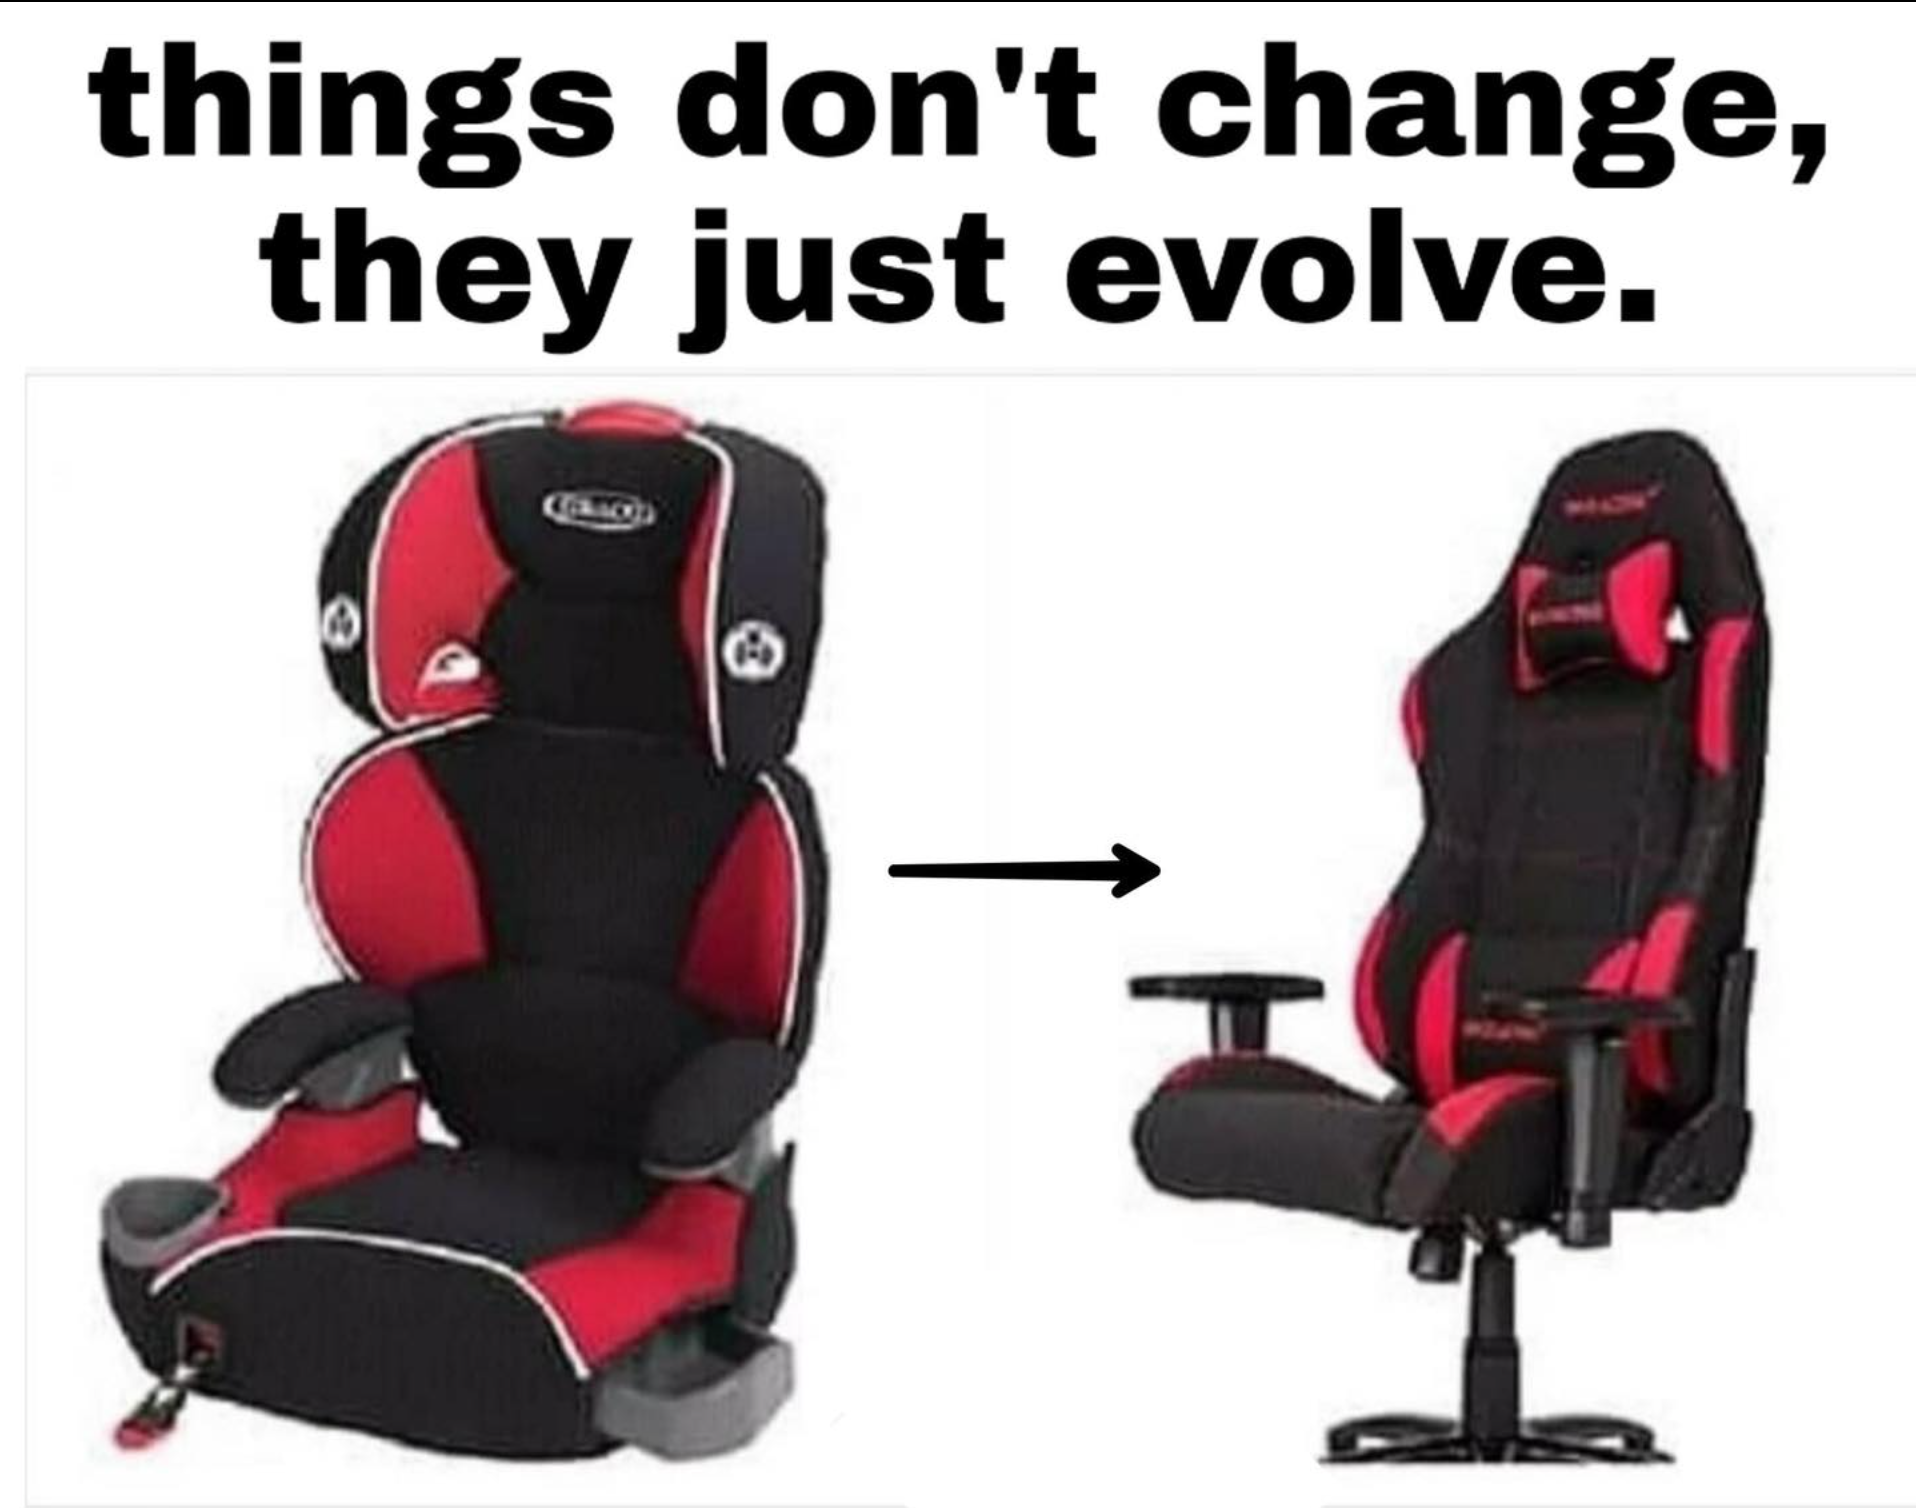 gaming memes - full size booster seat - things don't change, they just evolve.